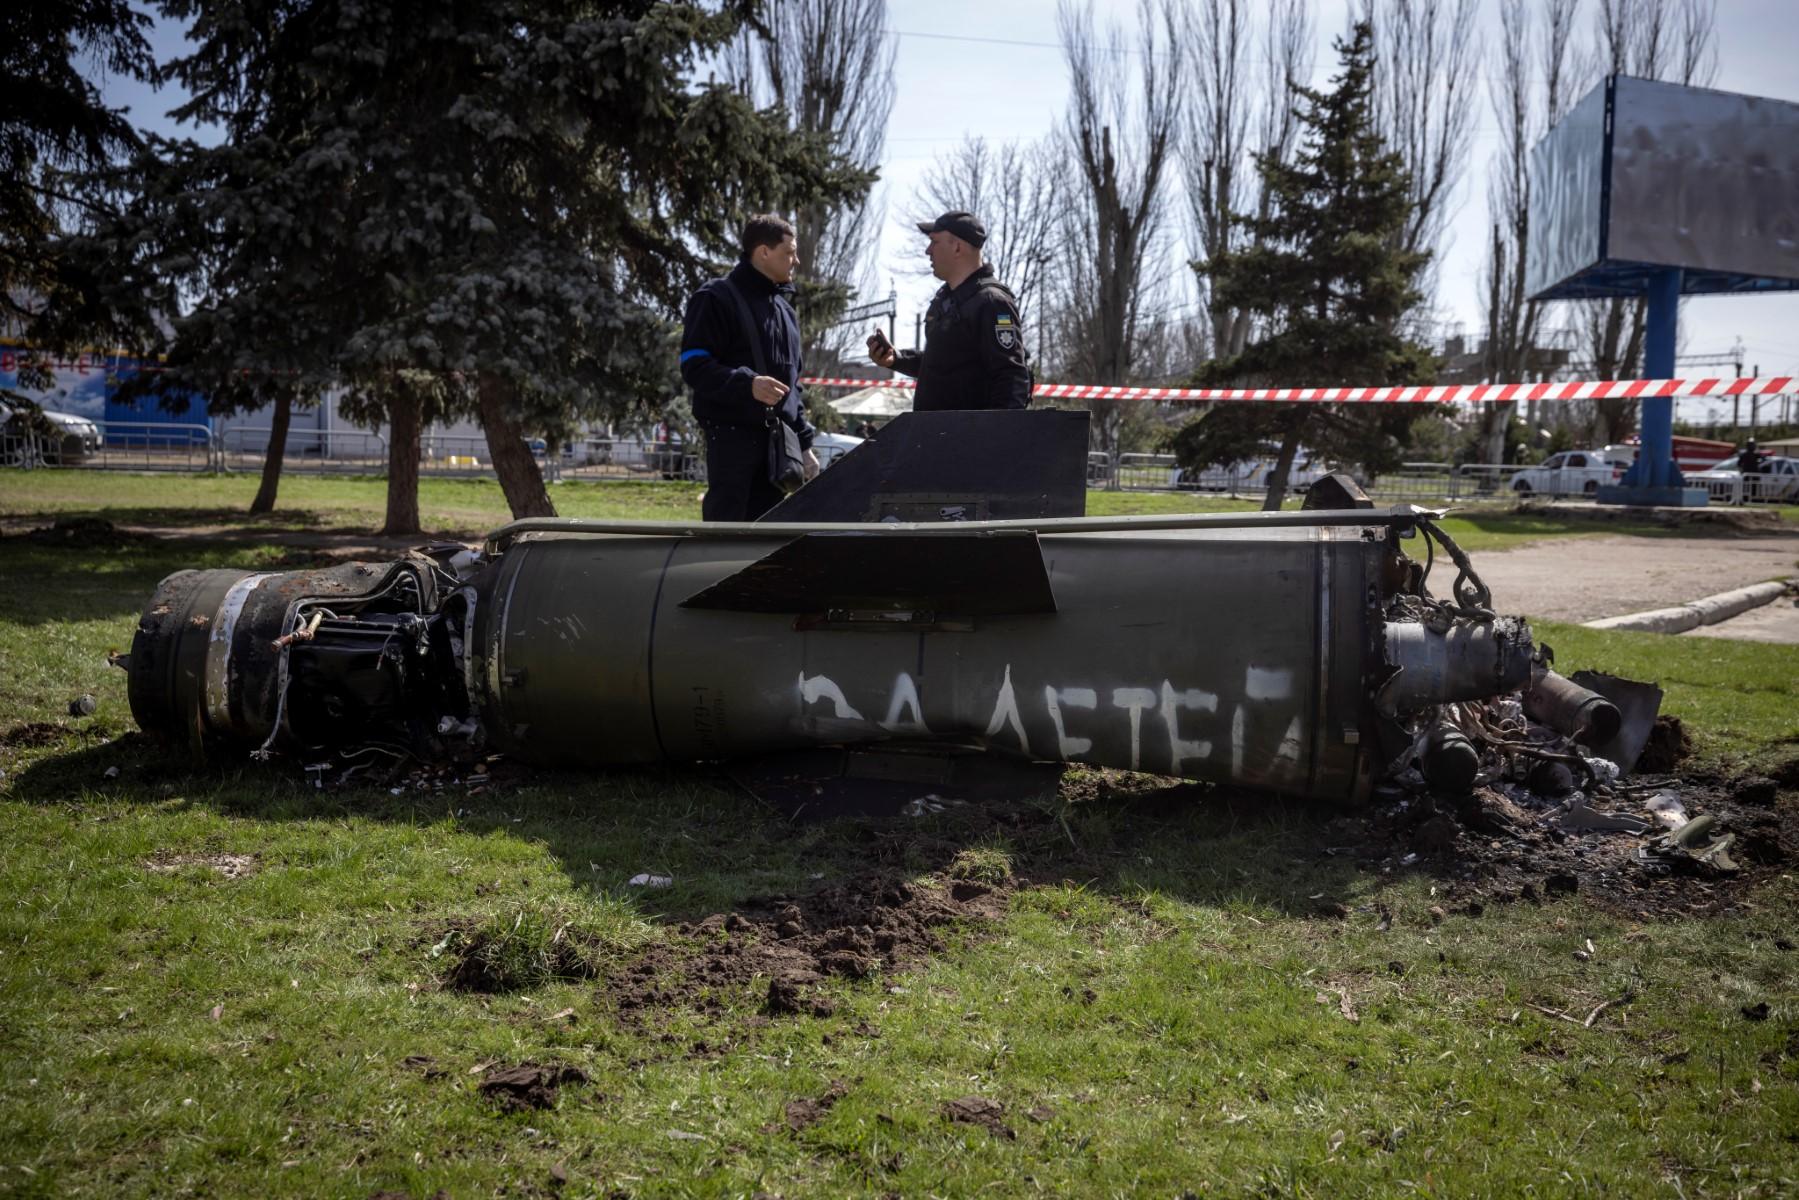 Ukrainian police inspect the remains of a large rocket with the words 'for our children' in Russian next to the main building of a train station in Kramatorsk, eastern Ukraine, used for civilian evacuations that was hit by a rocket attack killing at least 35 people, on April 8. Photo: AFP